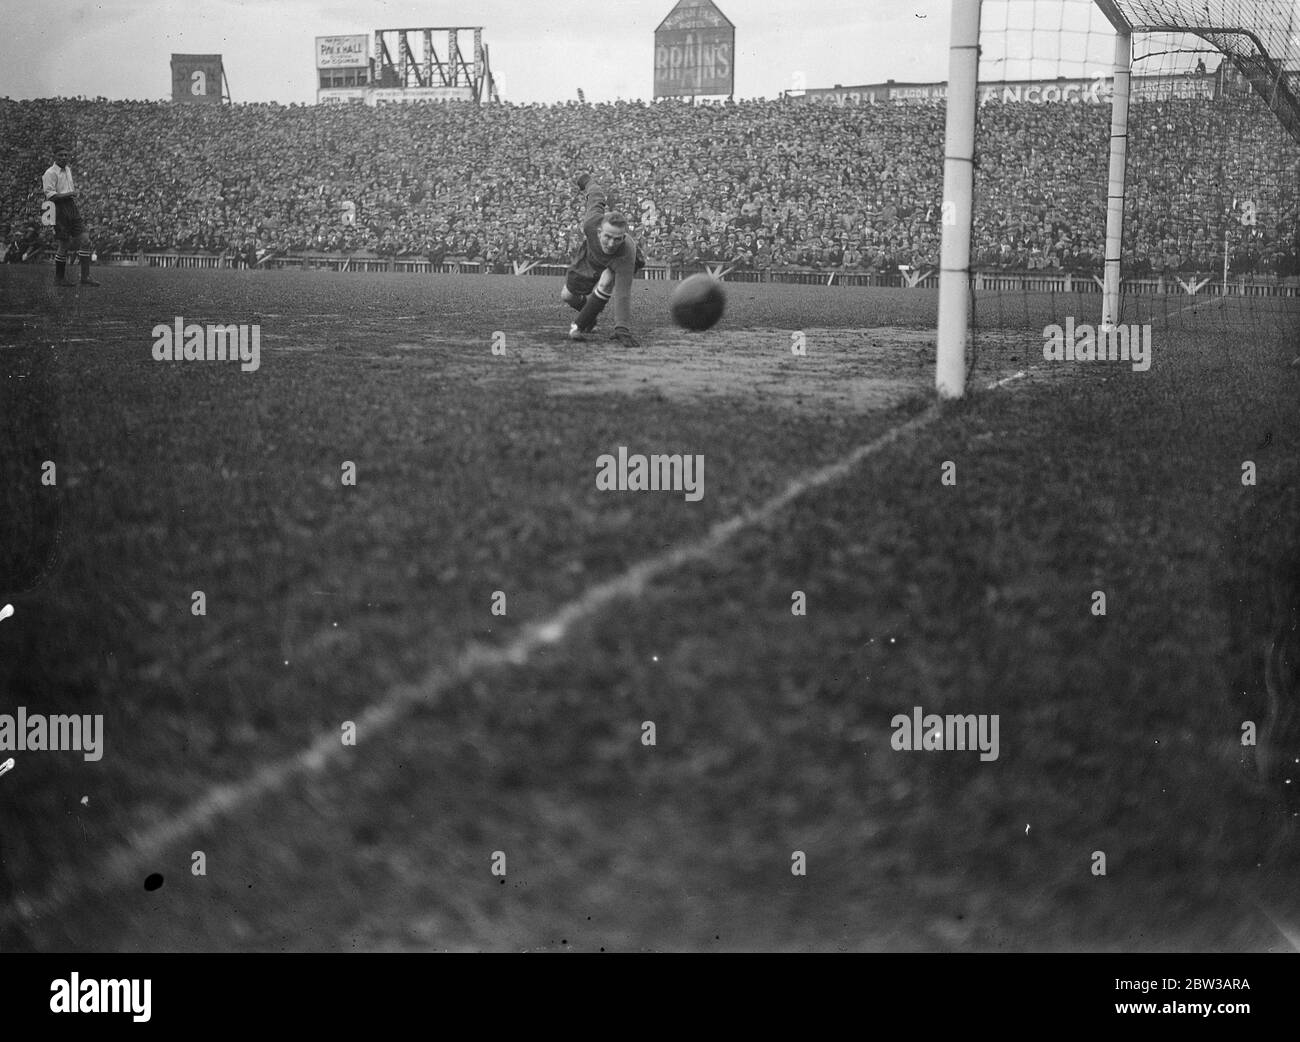 Hibbs saves in international soccer match at Cardiff . England won the first international match of the season when she defeated Wales 4 - 0 at Cardiff . Photo shows Harry Hibbs of Birmingham ( the English goalkeeper ) saving from Tom Evans of Tottenham Football club ( Wales ) during the match . 29 September 1934 Stock Photo